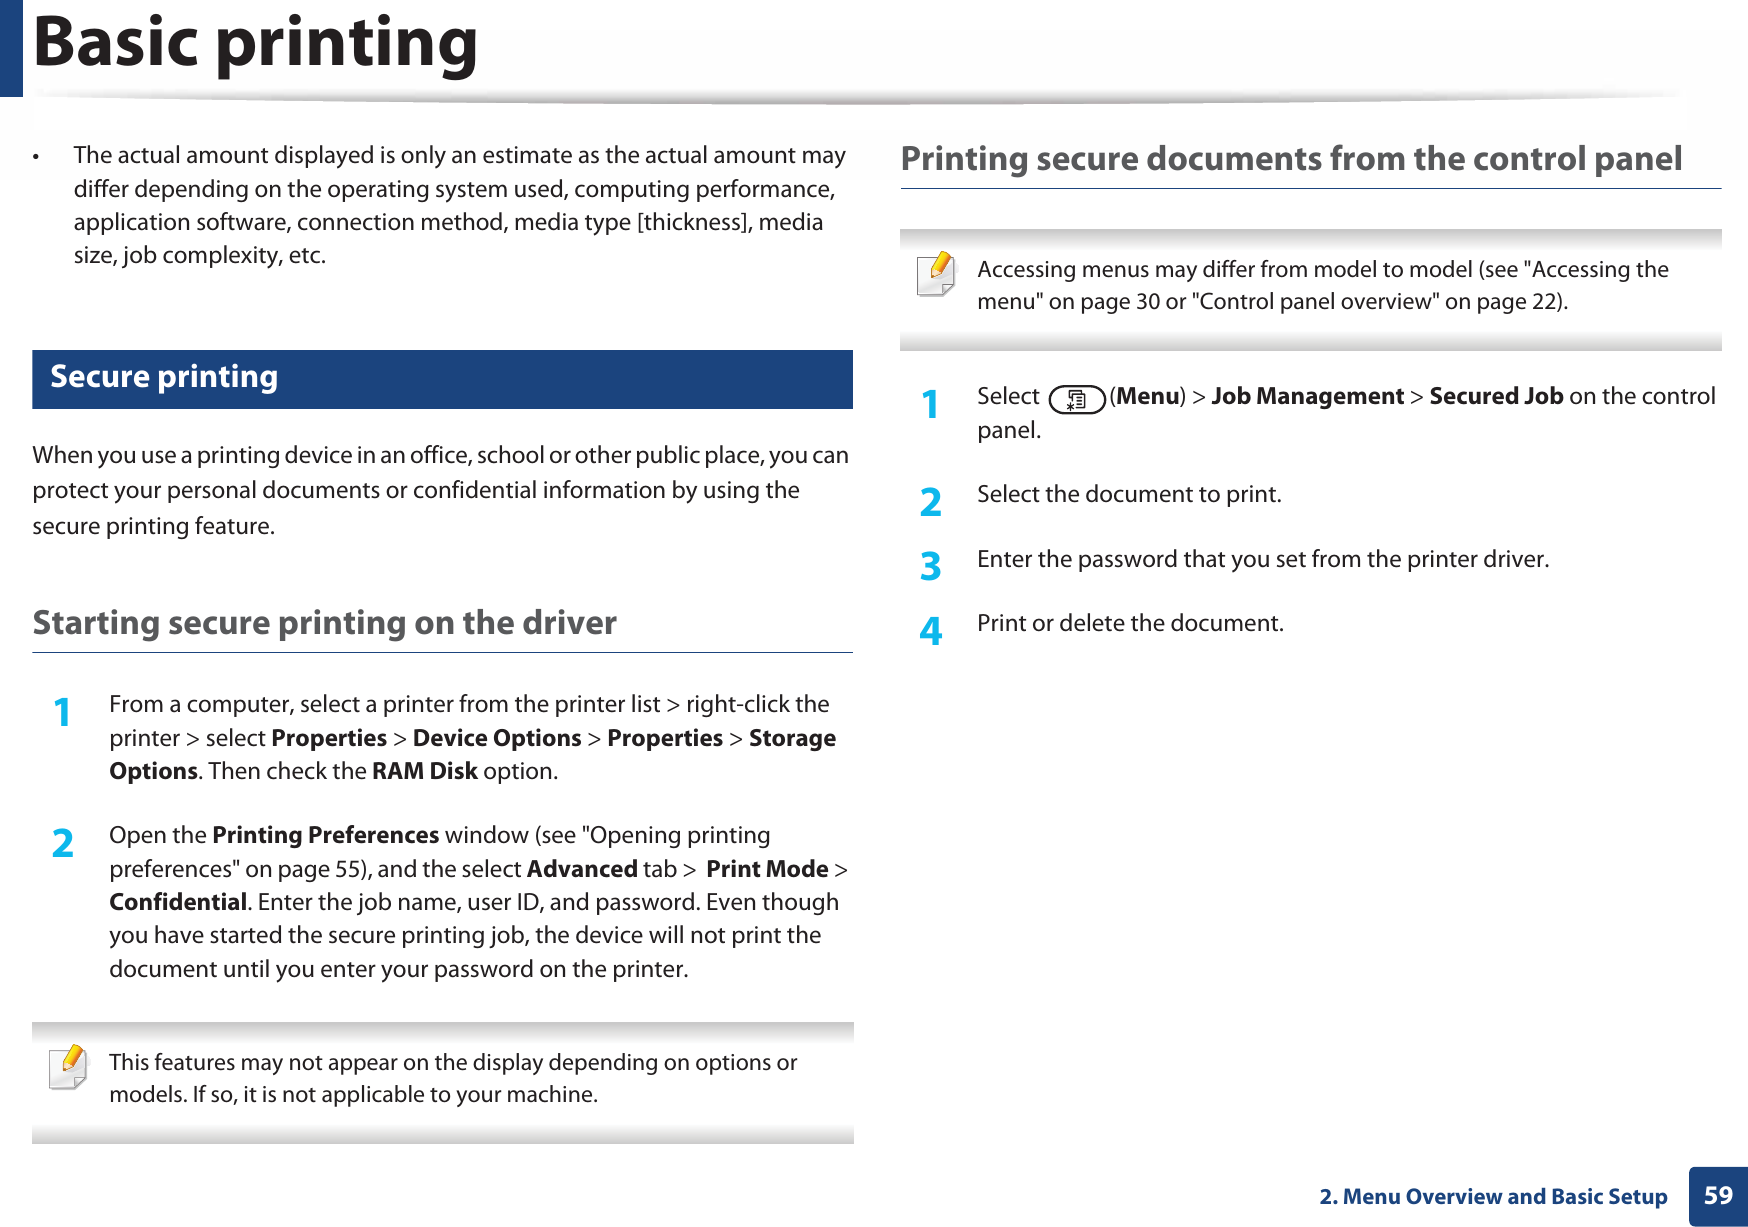 Basic printing592. Menu Overview and Basic Setup• The actual amount displayed is only an estimate as the actual amount may differ depending on the operating system used, computing performance, application software, connection method, media type [thickness], media size, job complexity, etc.14 Secure printingWhen you use a printing device in an office, school or other public place, you can protect your personal documents or confidential information by using the secure printing feature.Starting secure printing on the driver1From a computer, select a printer from the printer list &gt; right-click the printer &gt; select Properties &gt; Device Options &gt; Properties &gt; Storage Options. Then check the RAM Disk option.2  Open the Printing Preferences window (see &quot;Opening printing preferences&quot; on page 55), and the select Advanced tab &gt;  Print Mode &gt; Confidential. Enter the job name, user ID, and password. Even though you have started the secure printing job, the device will not print the document until you enter your password on the printer. This features may not appear on the display depending on options or models. If so, it is not applicable to your machine. Printing secure documents from the control panel Accessing menus may differ from model to model (see &quot;Accessing the menu&quot; on page 30 or &quot;Control panel overview&quot; on page 22). 1Select (Menu) &gt; Job Management &gt; Secured Job on the control panel.2  Select the document to print.3  Enter the password that you set from the printer driver.4  Print or delete the document.